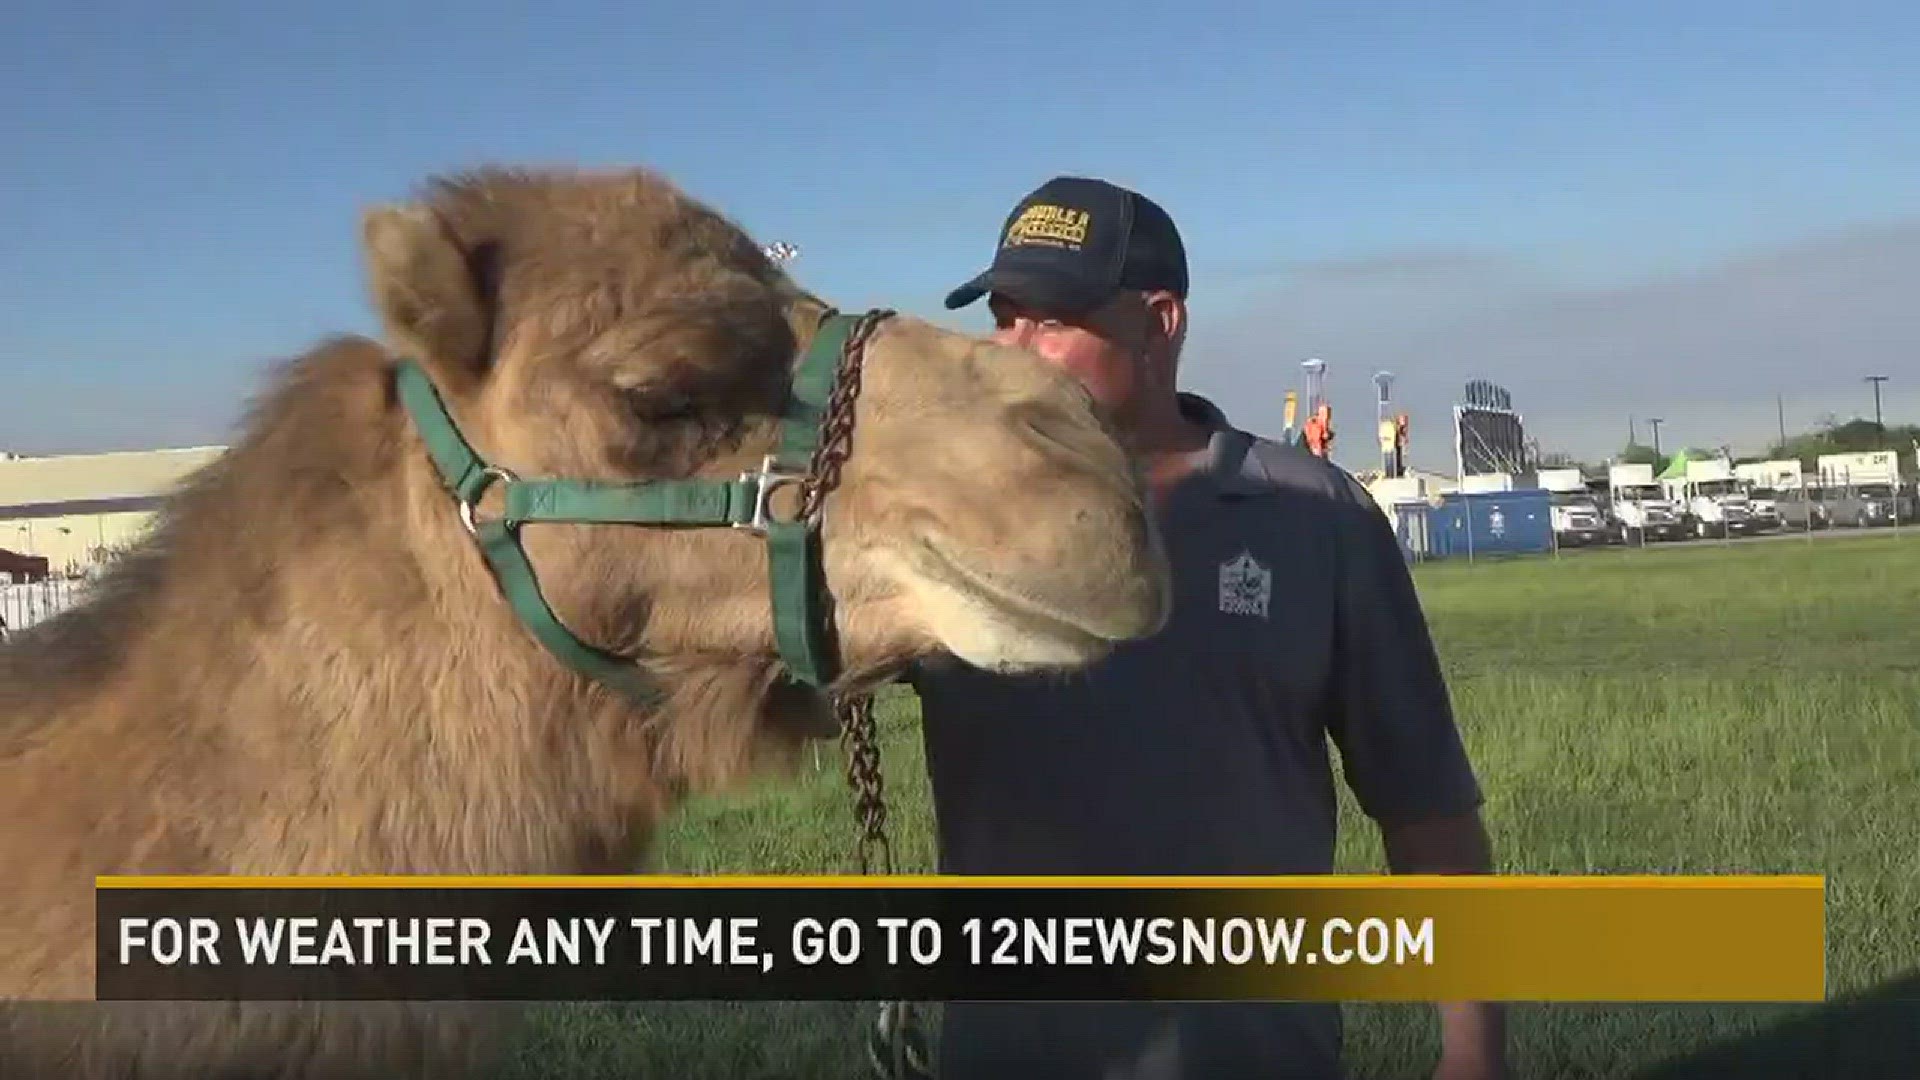 Chief Meteorologist Patrick Vaughn rides camel during weathercast.